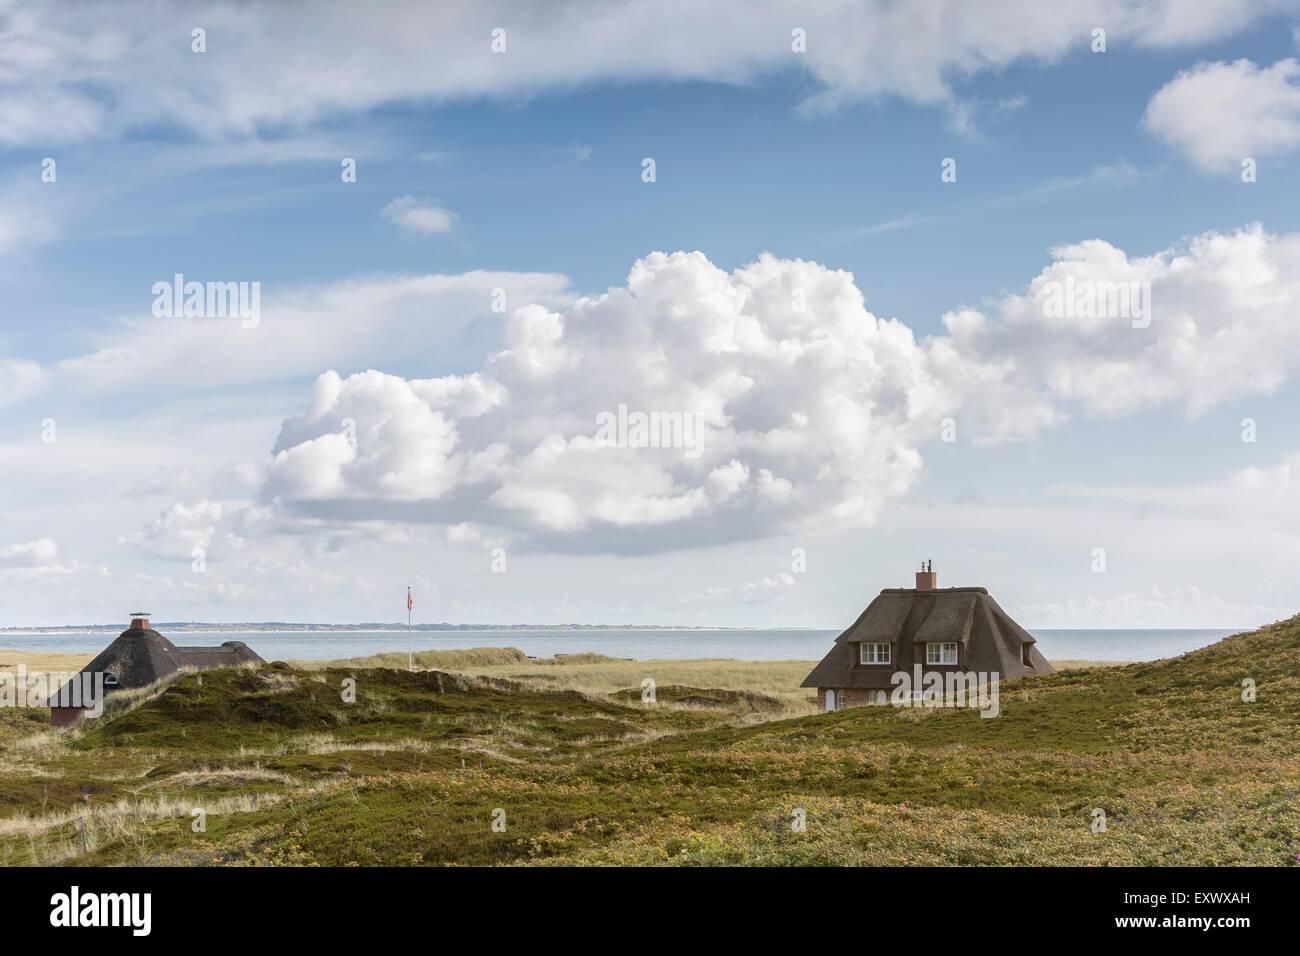 Holiday houses, Kersig-Siedlung, Hoernum, Sylt, Schleswig-Holstein, Germany, Europe Stock Photo